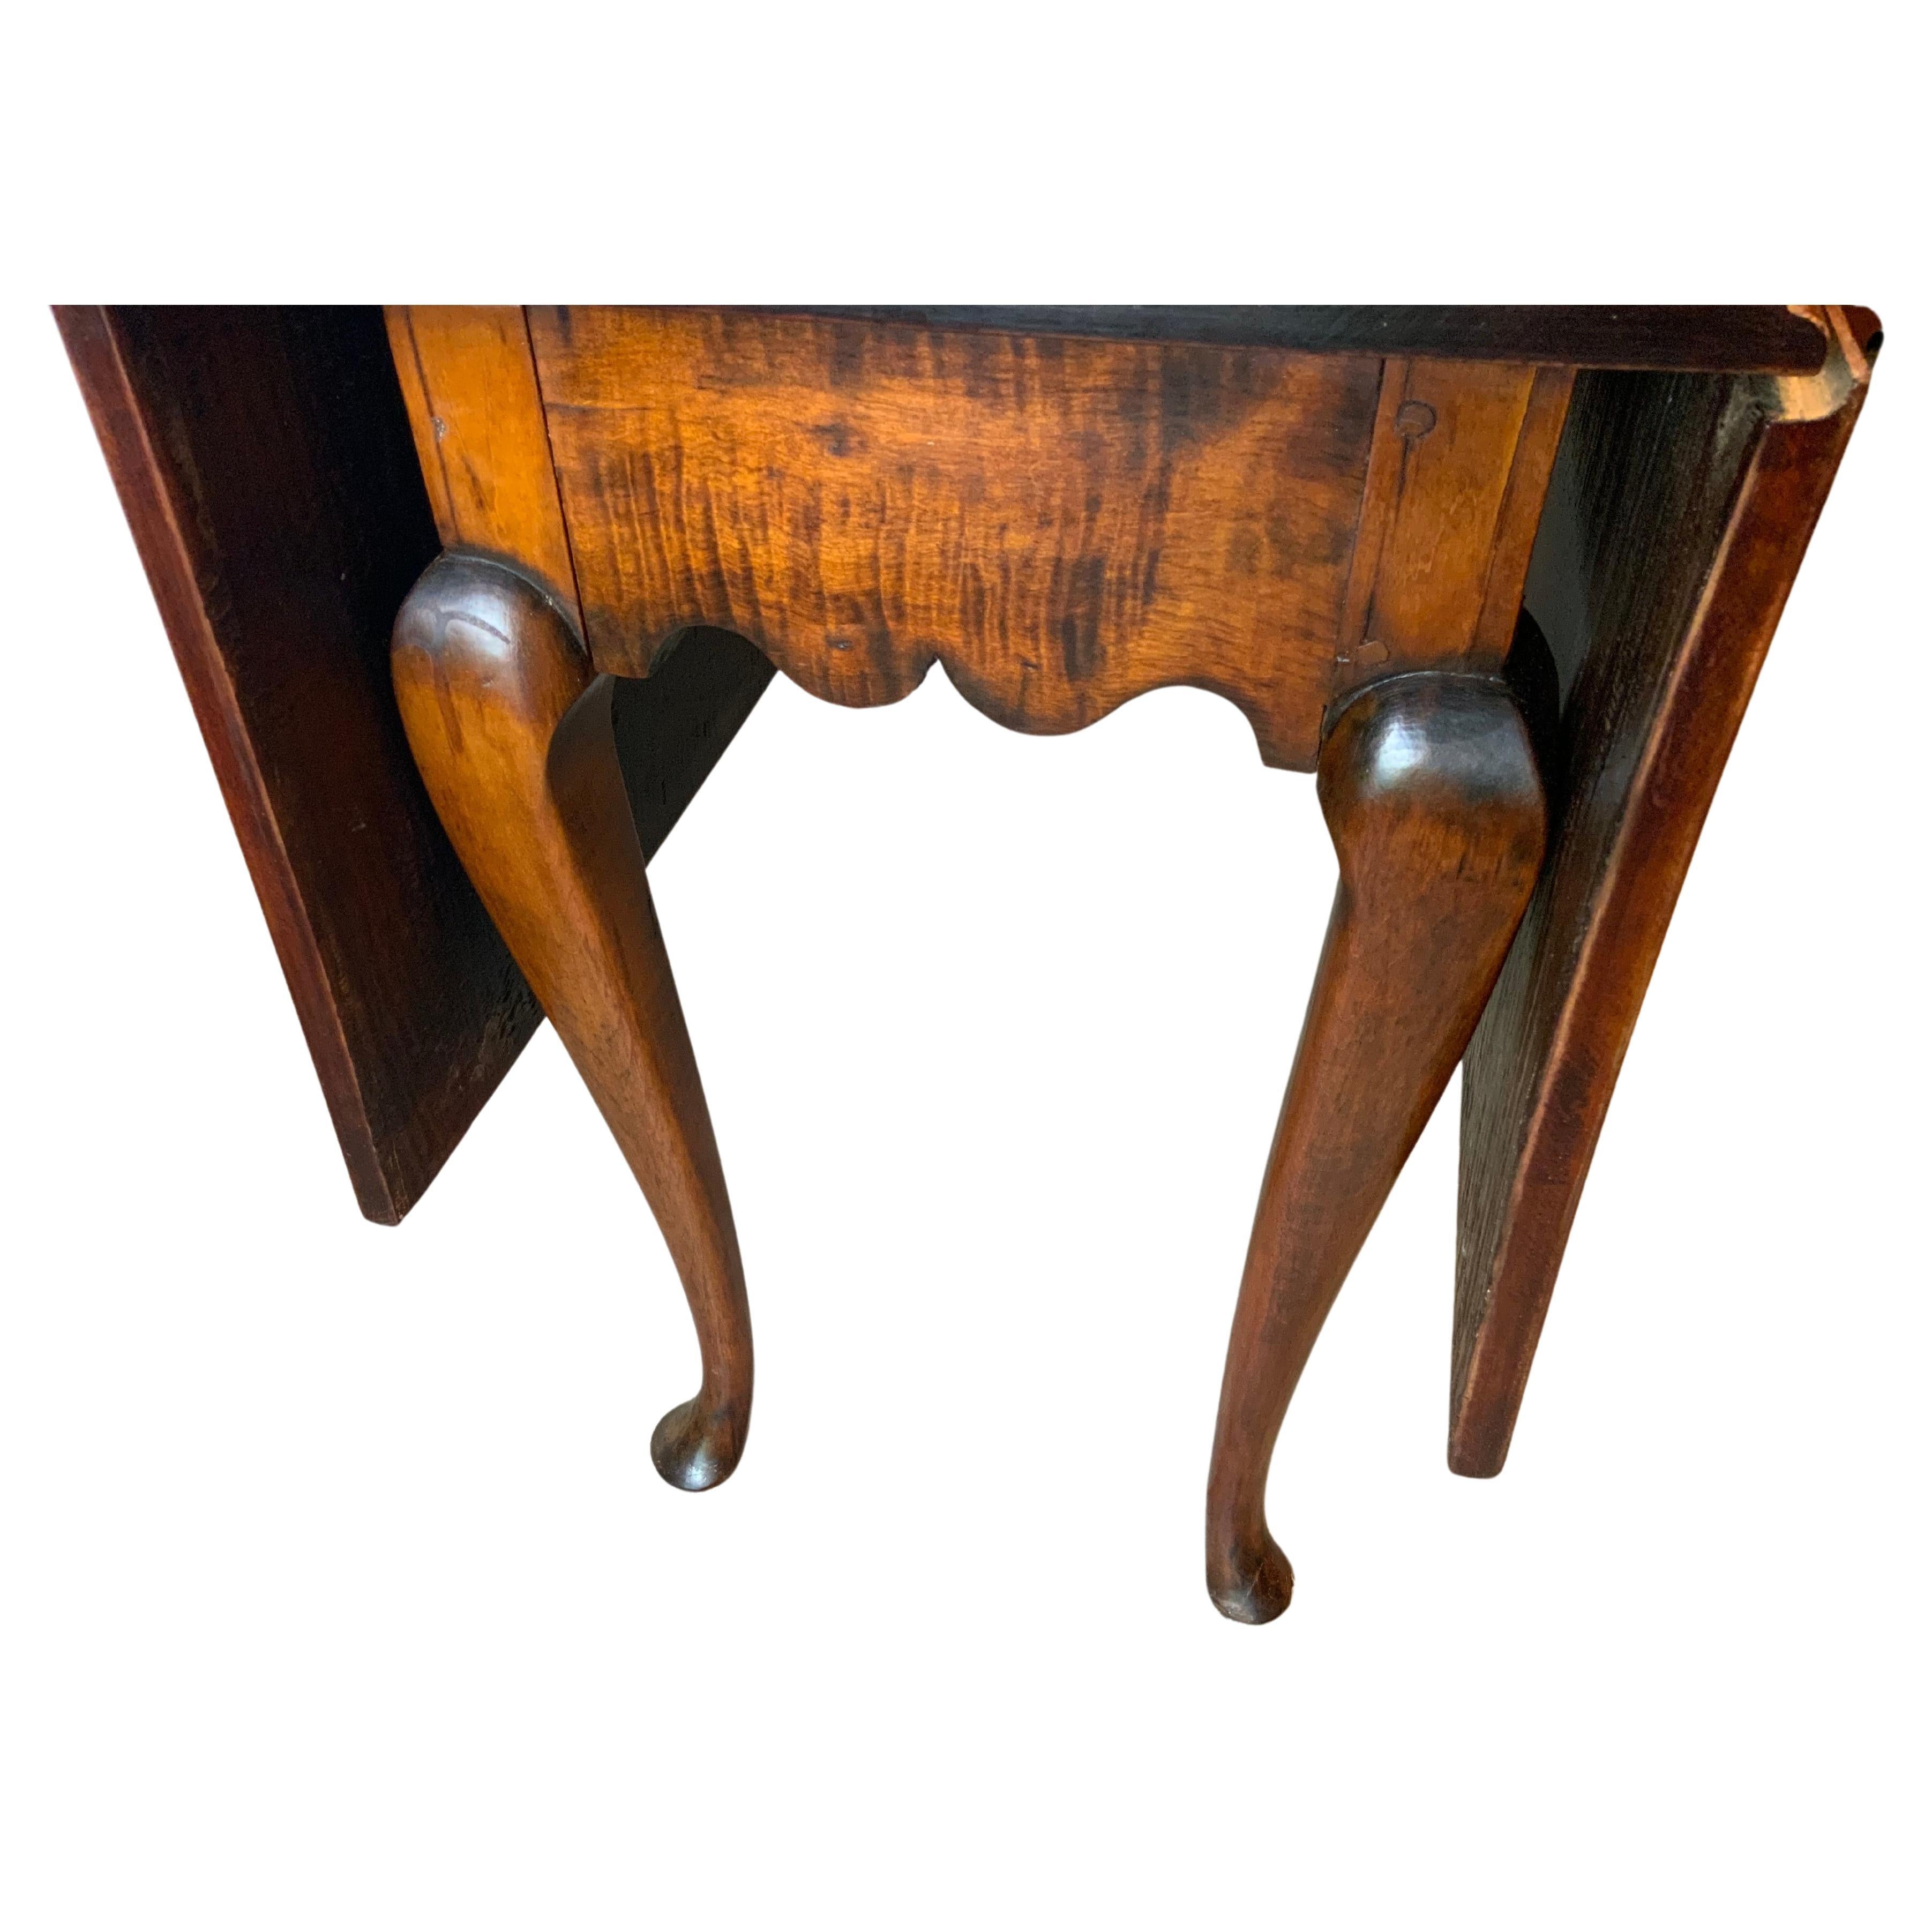 A very attractive early Federal Queen Anne Curly Maple Drop leaf table with a great aged color and patina on an older refinished surface.  Looks to possibly be a very early marriage of an 18th century top and a base of the same age by evidence of